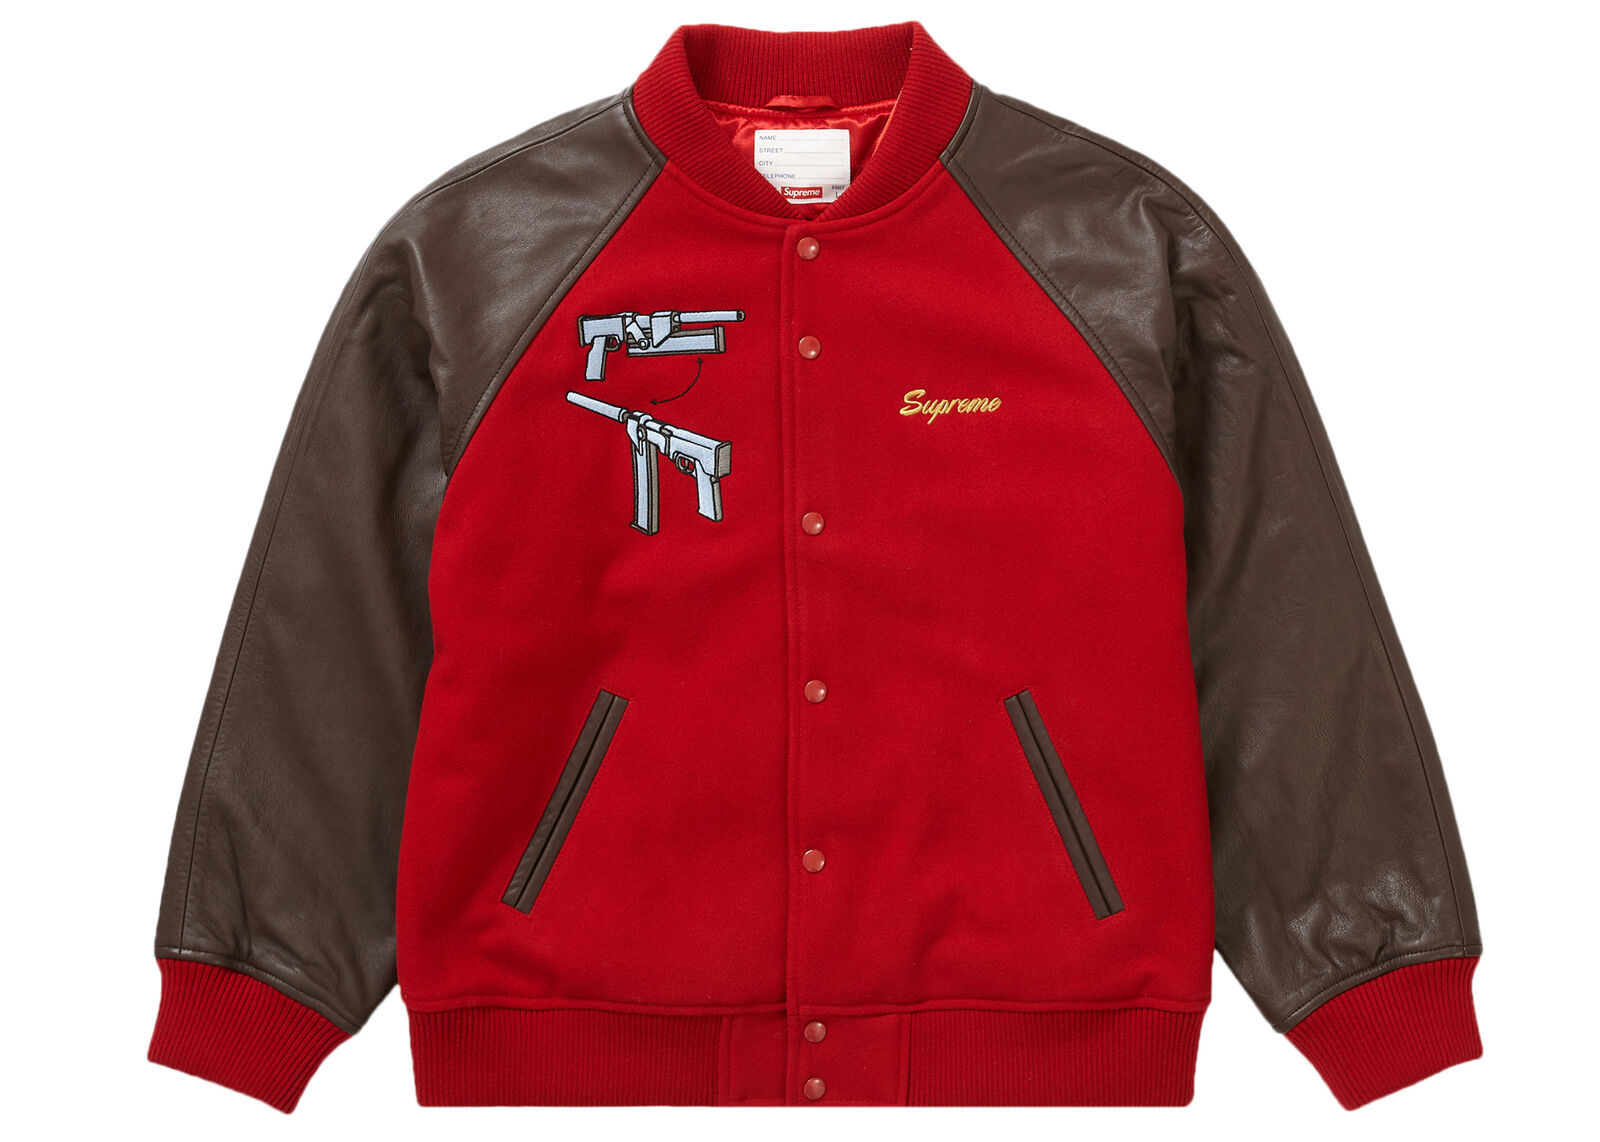 Supreme Aeon Flux Varsity Jacket Red Size Small